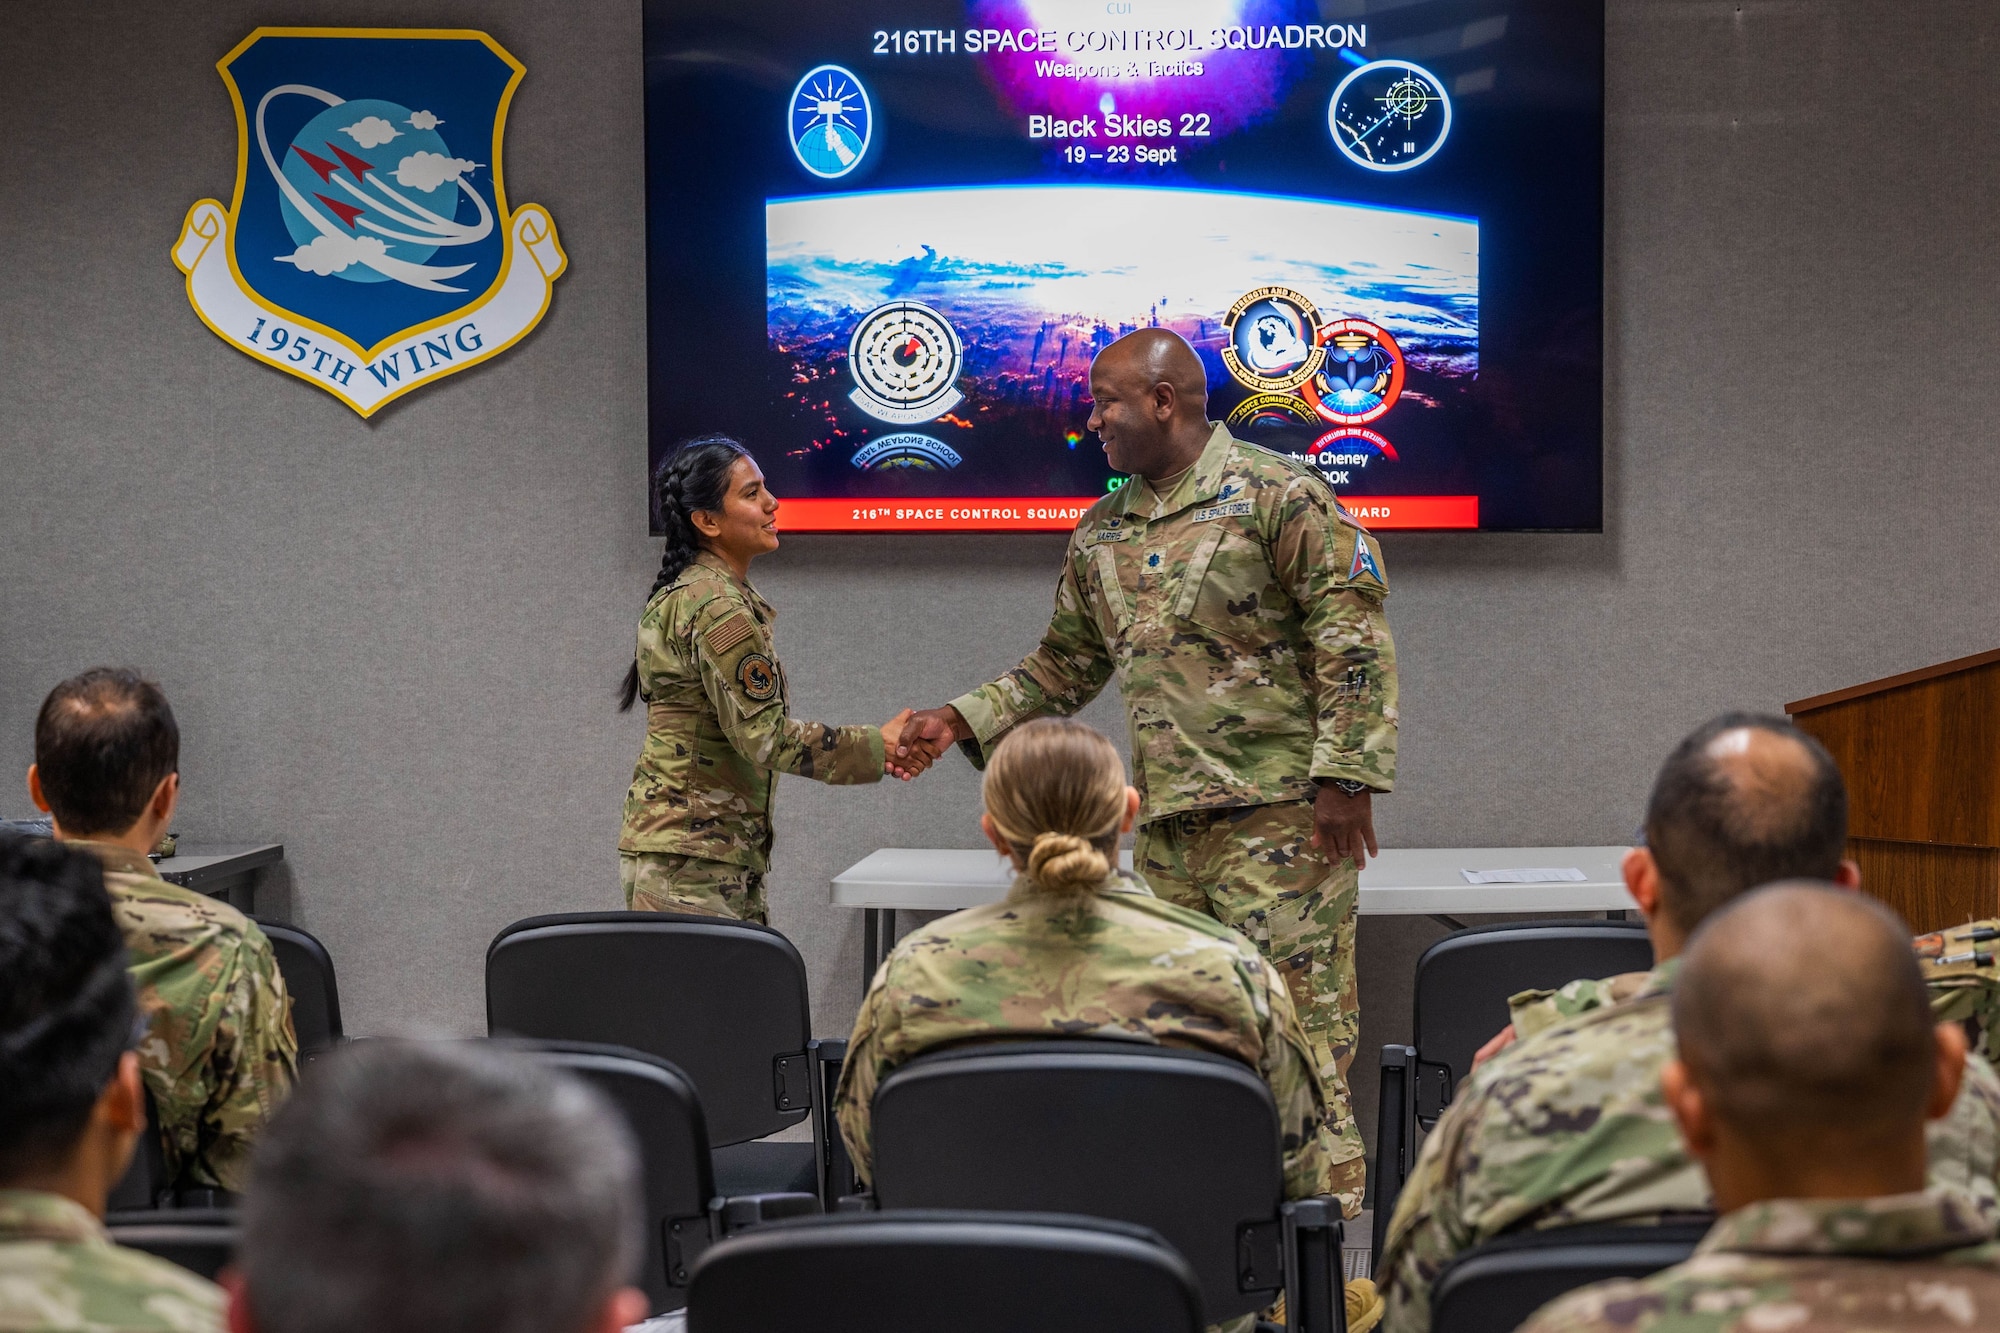 U.S. Space Force Lt. Col. Albert Harris, Commander of the 392nd Combat Training Squadron, presents a commander's coin to U.S. Air Force Staff Sgt. Esmeralda Sanchez-Avila from the 216th Space Control Squadron during BLACK SKIES 22 at Vandenberg Space Force Base